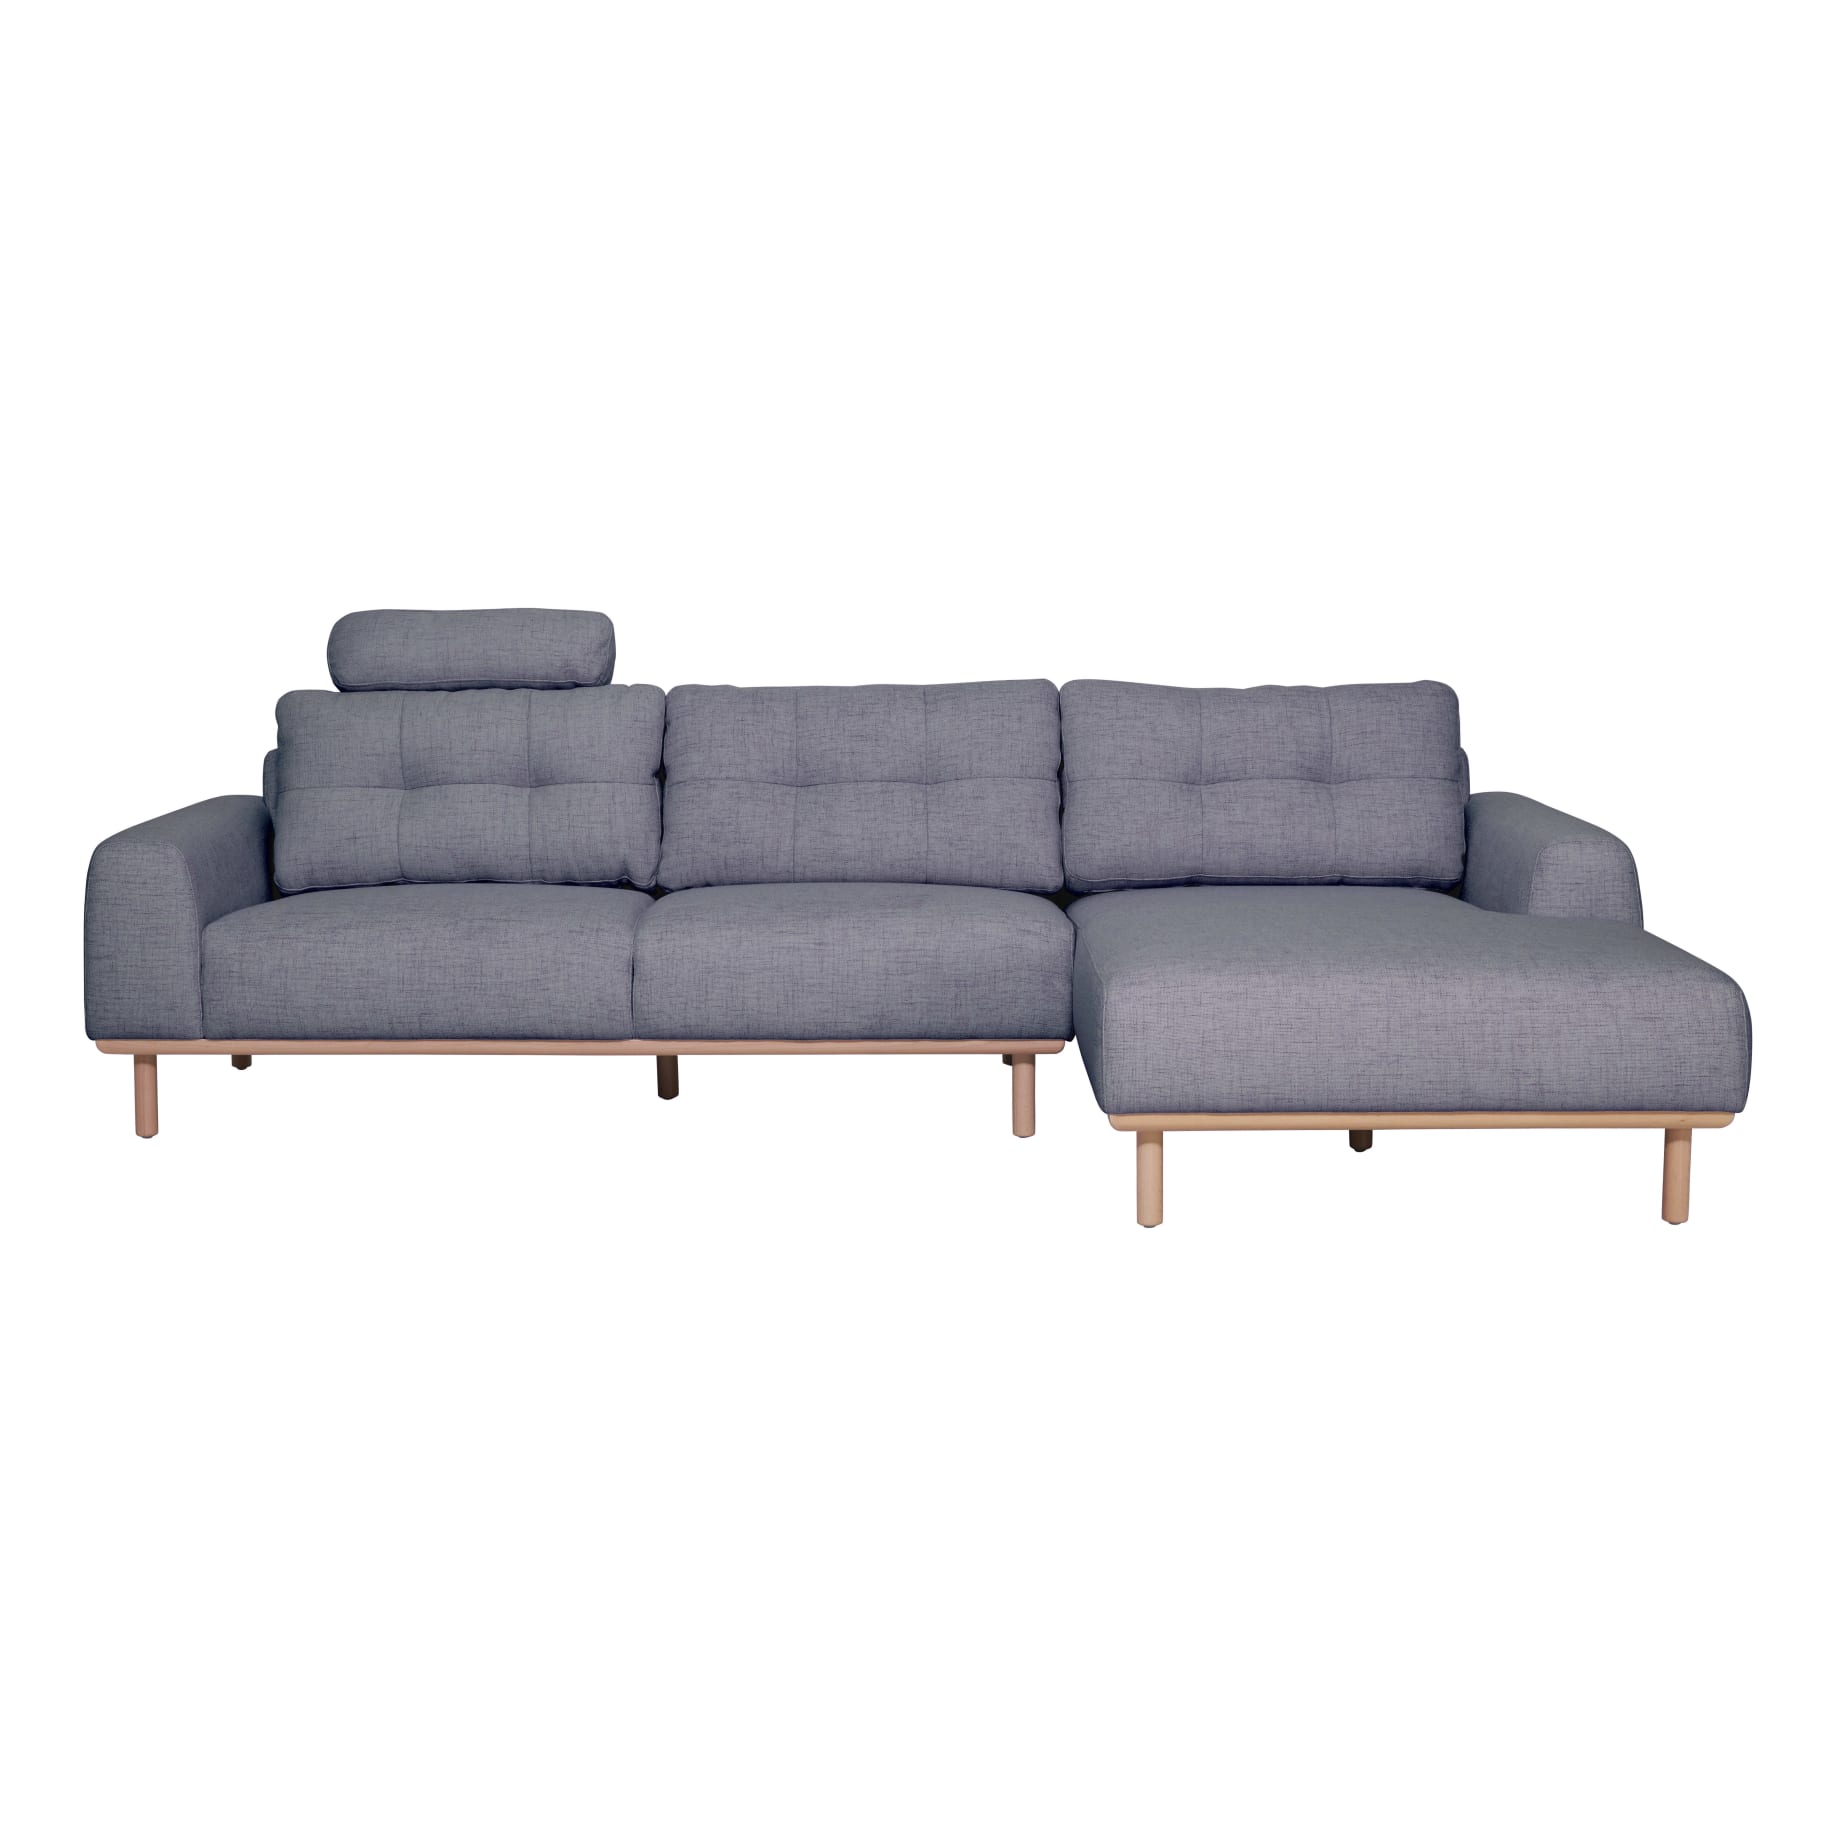 Stratton 3 Seater Sofa + Chaise RHF in Cloud Pewter